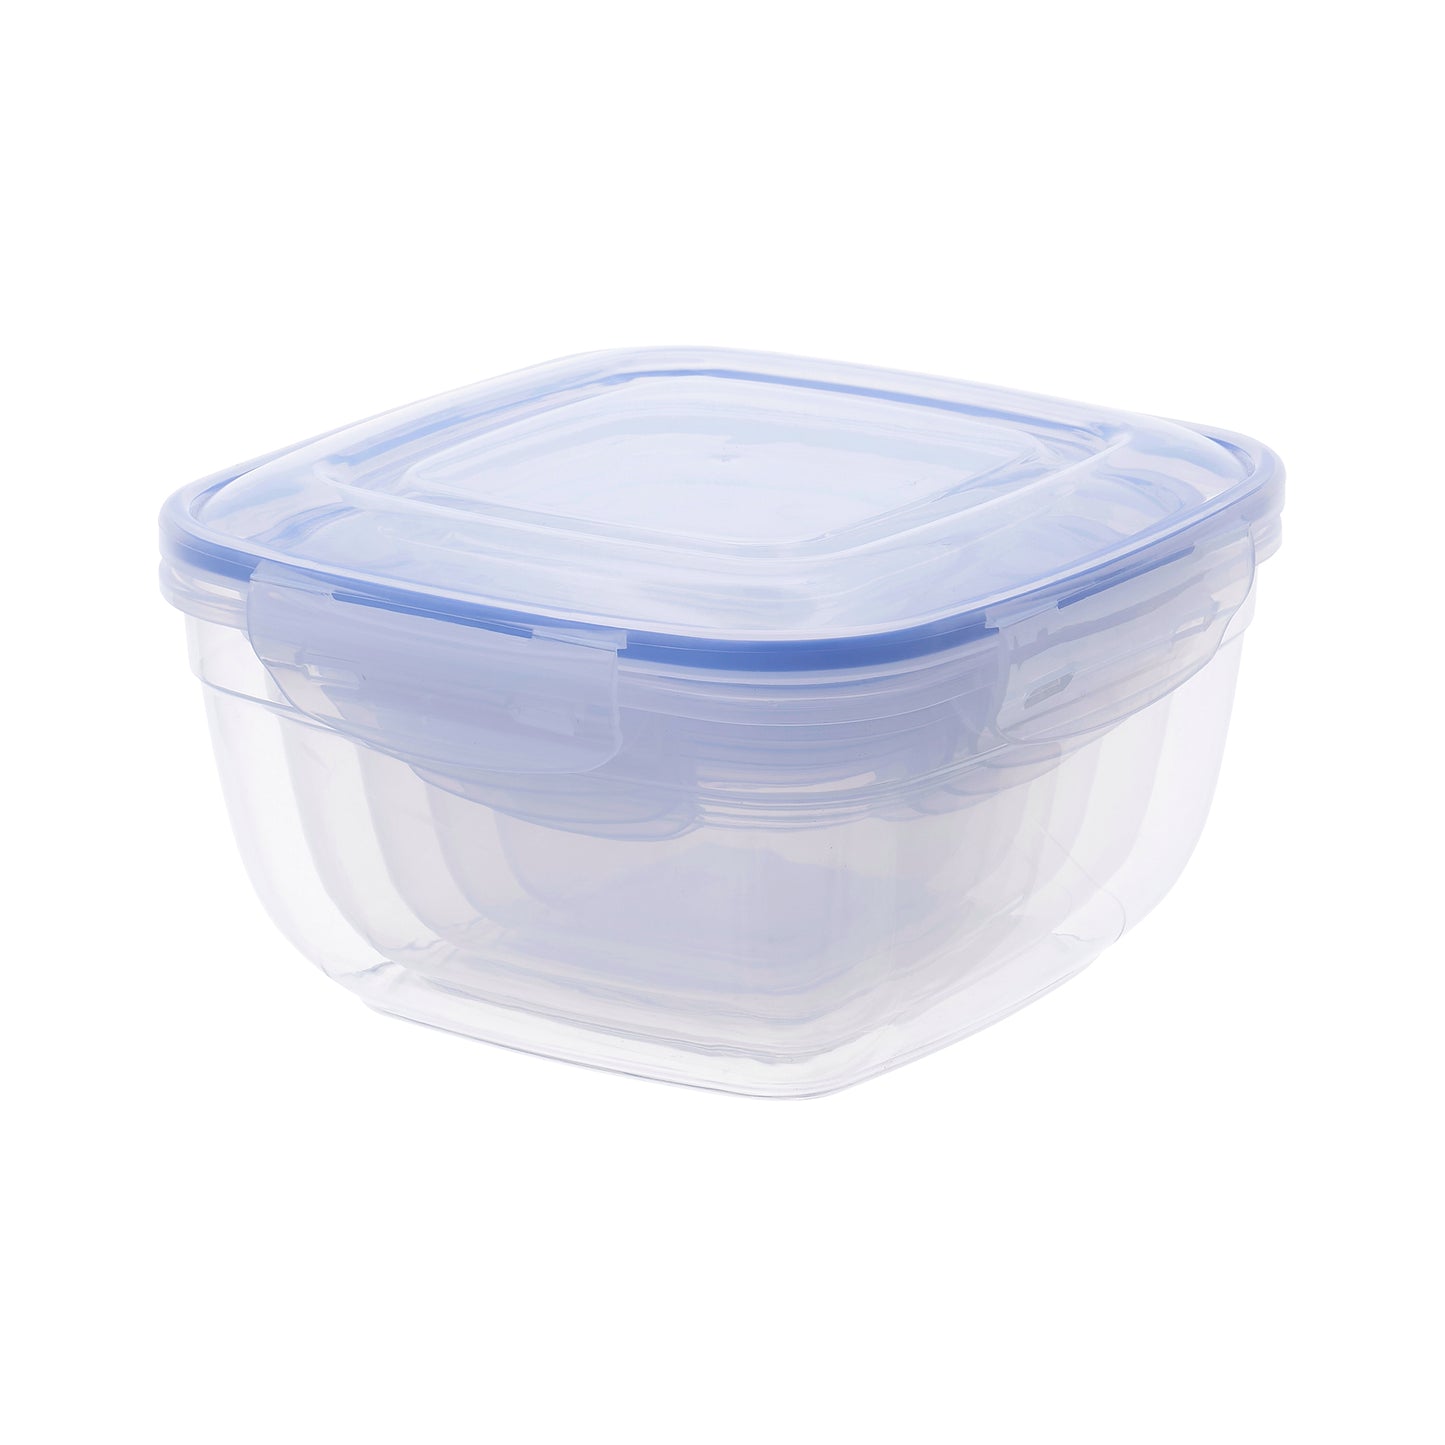 Choice 2 Qt. Translucent Square Polypropylene Food Storage Container